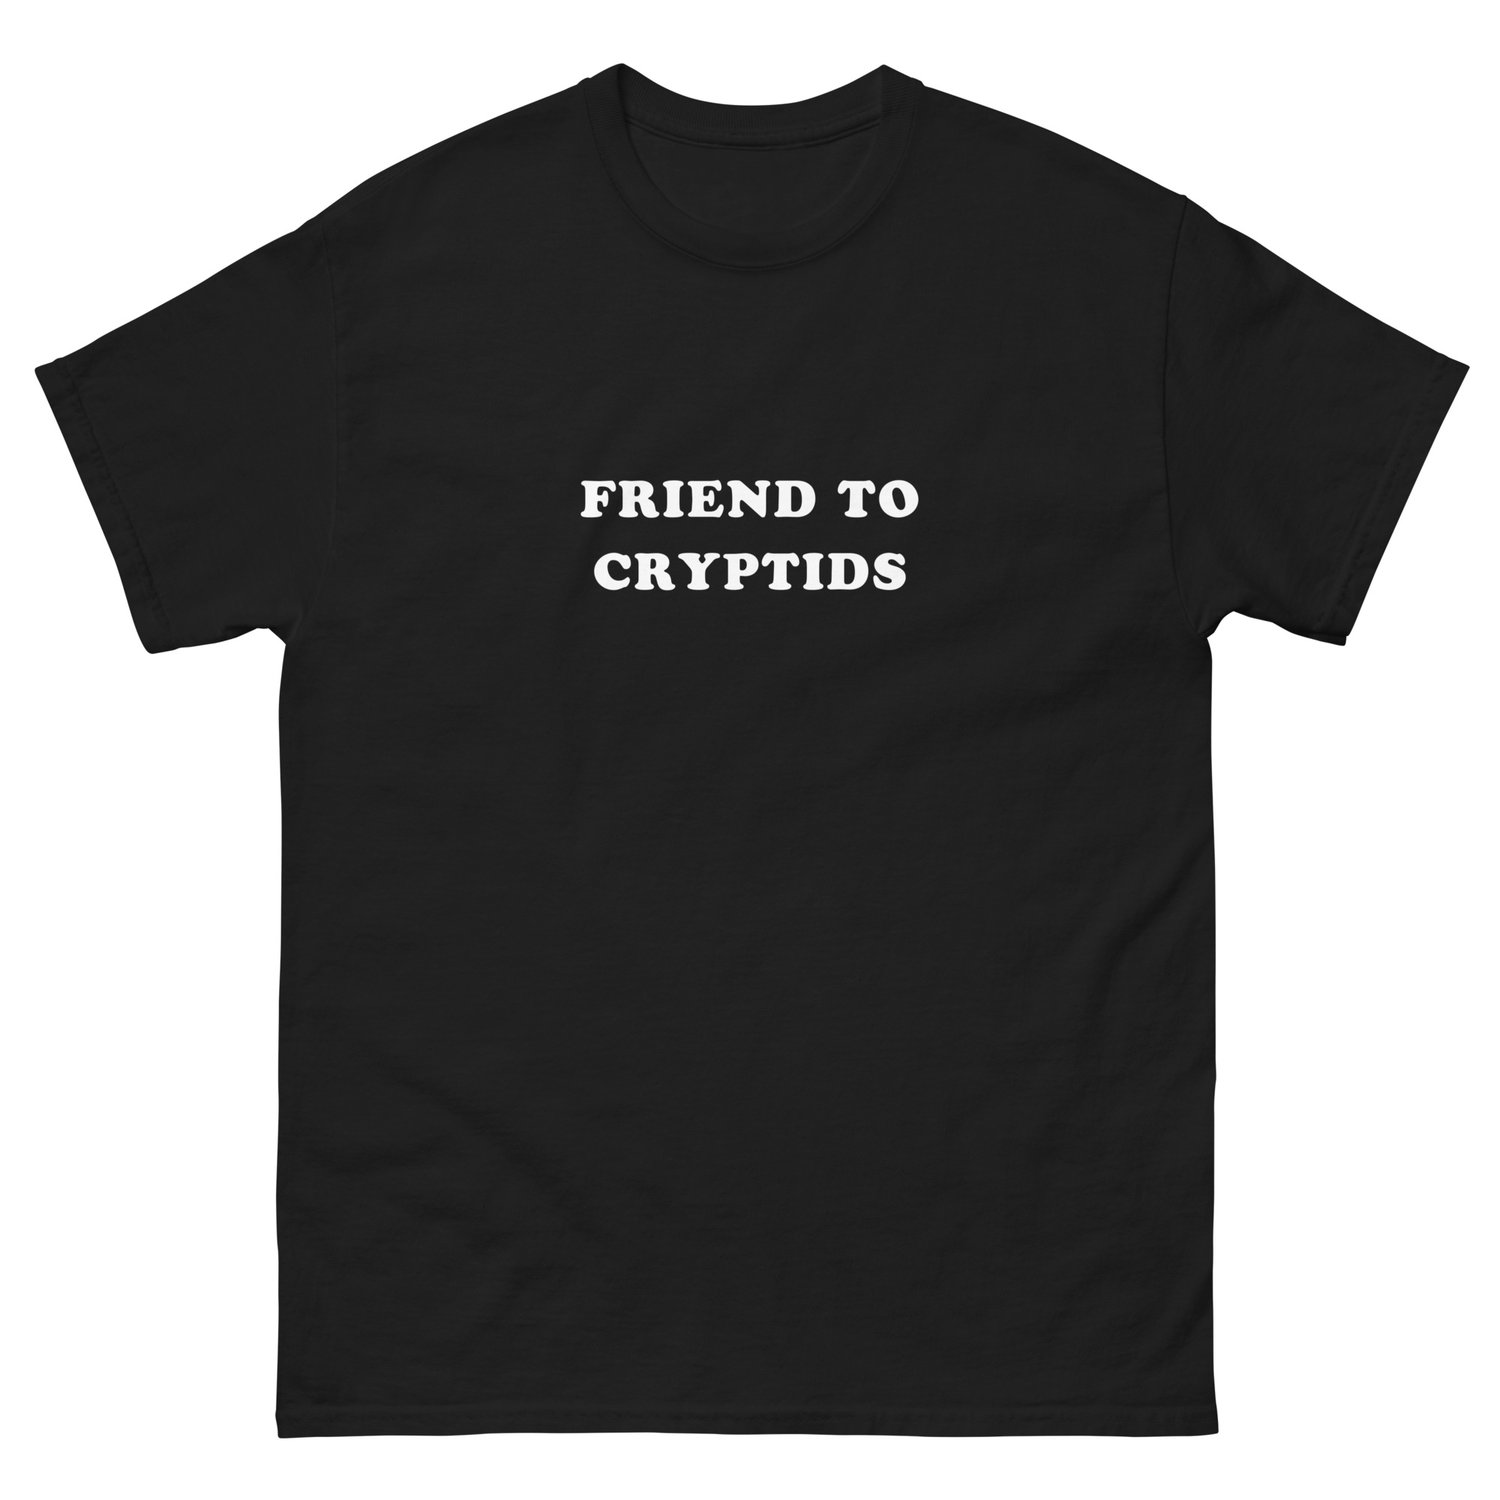 Image of Friend to Cryptids tee